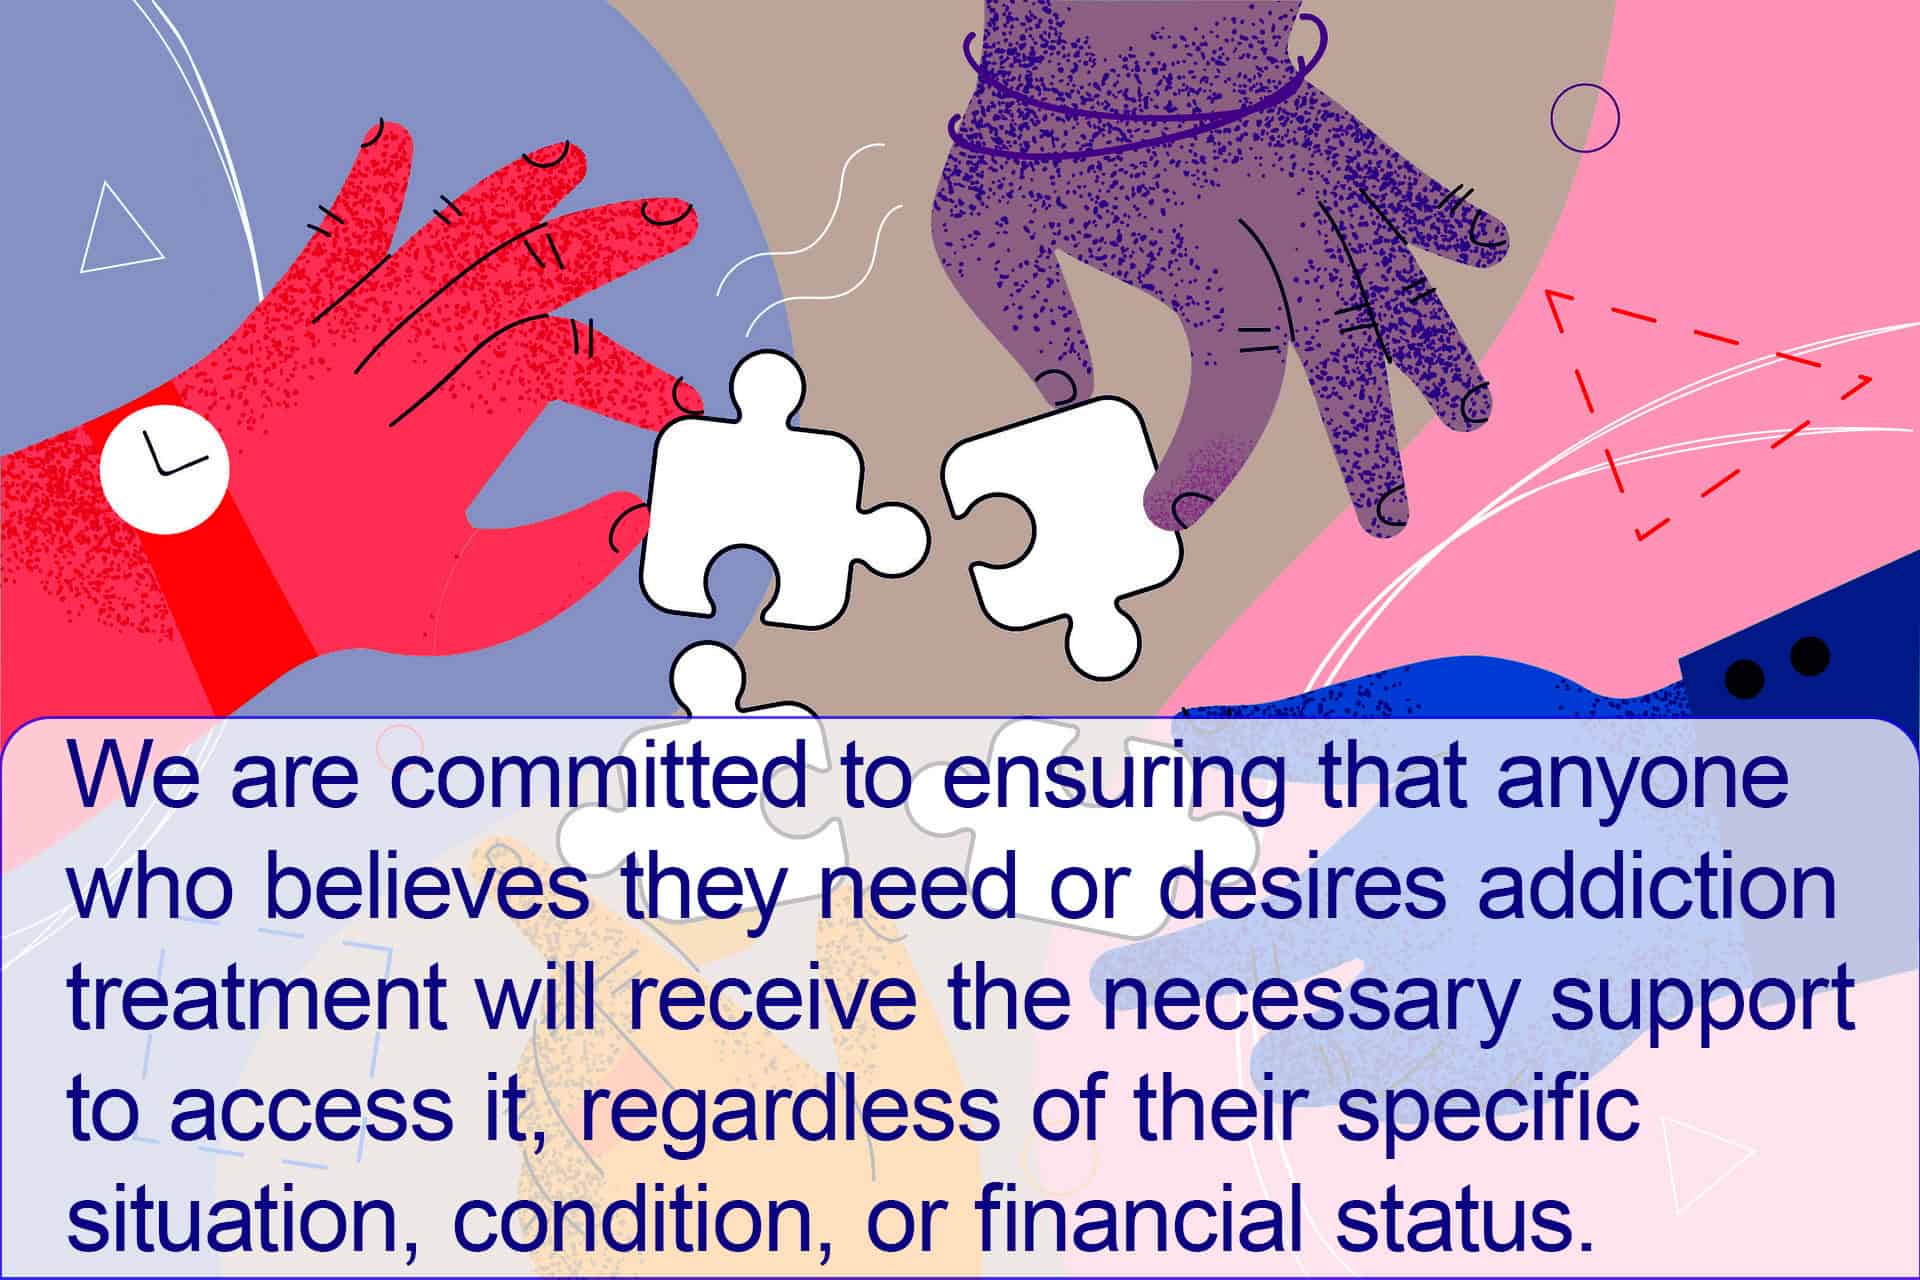 puzzling hands "We are committed to ensuring that anyone who believes they need or desires addiction treatment will receive the necessary support to access it, regardless of their specific situation, condition, or financial status."